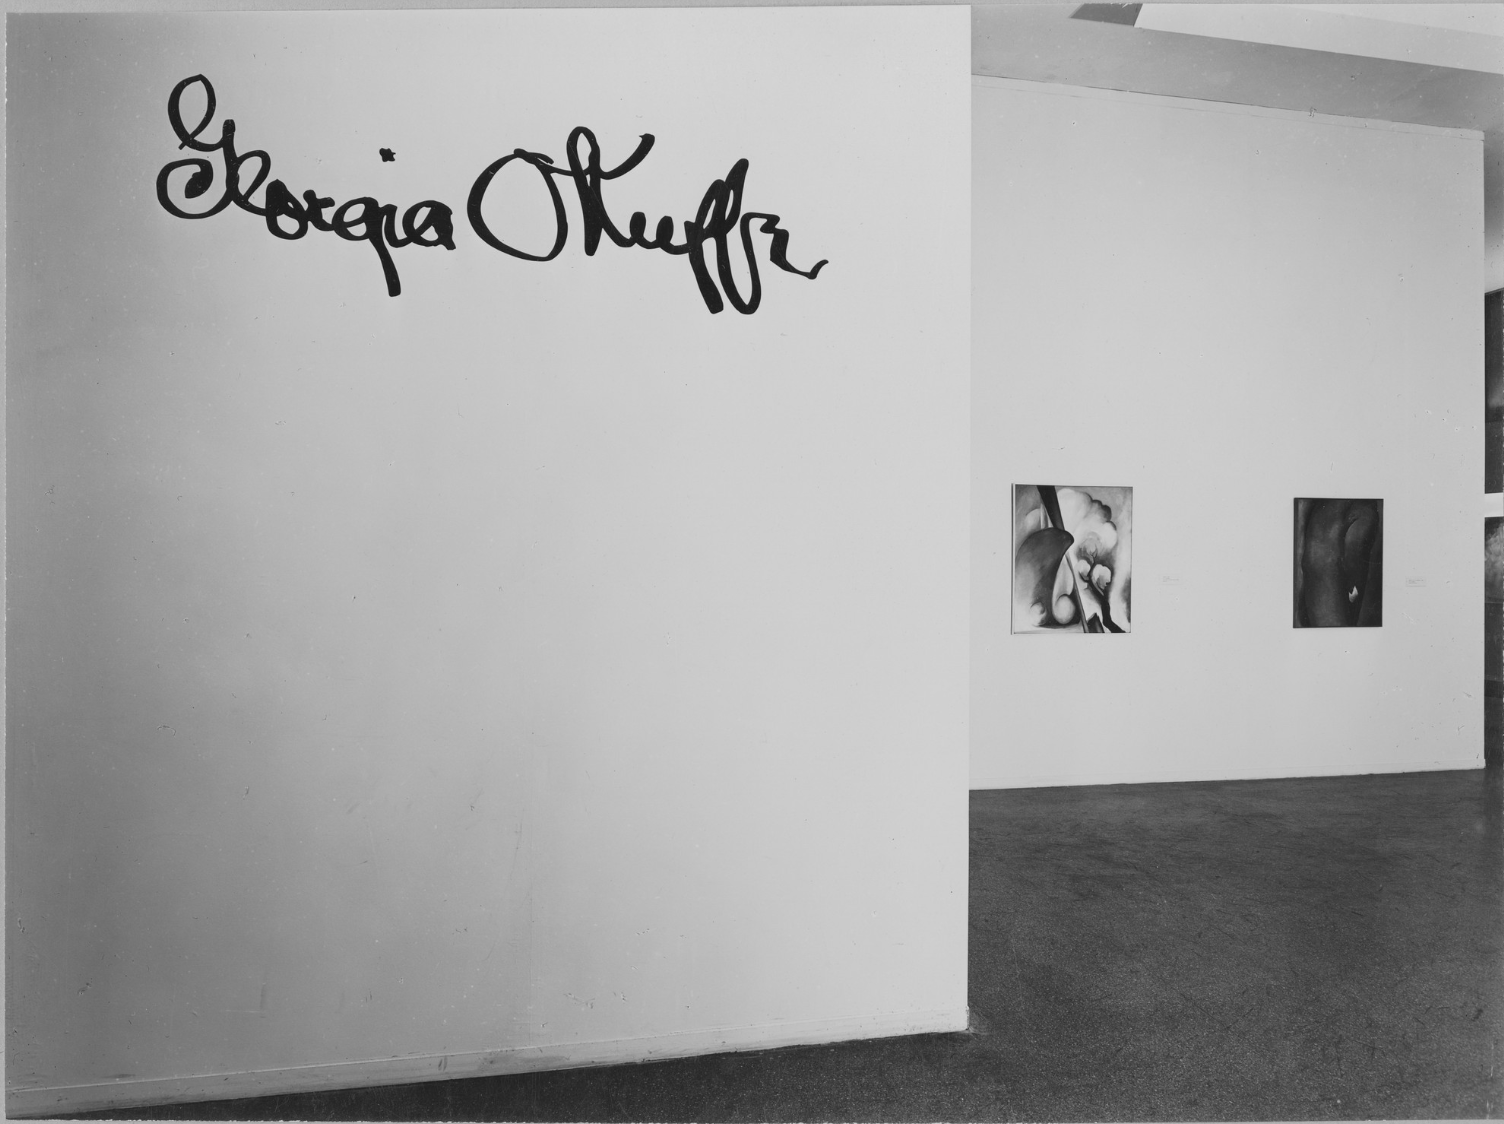 Black and white photograph. A white wall with Georgia O’Keeffe’s signature scrawled in black, oversized, cursive letters, takes up the left half of this image. The room beyond is hung with two paintings, and the sliver of an opening leading to another space is barely visible along the right edge. The letters of O’Keeffe’s name are rounded, with the lowercase g and f letters making spikes along its length. One painting in the background is lighter and shows stylized, curving forms; the other painting is dark and difficult to make out.